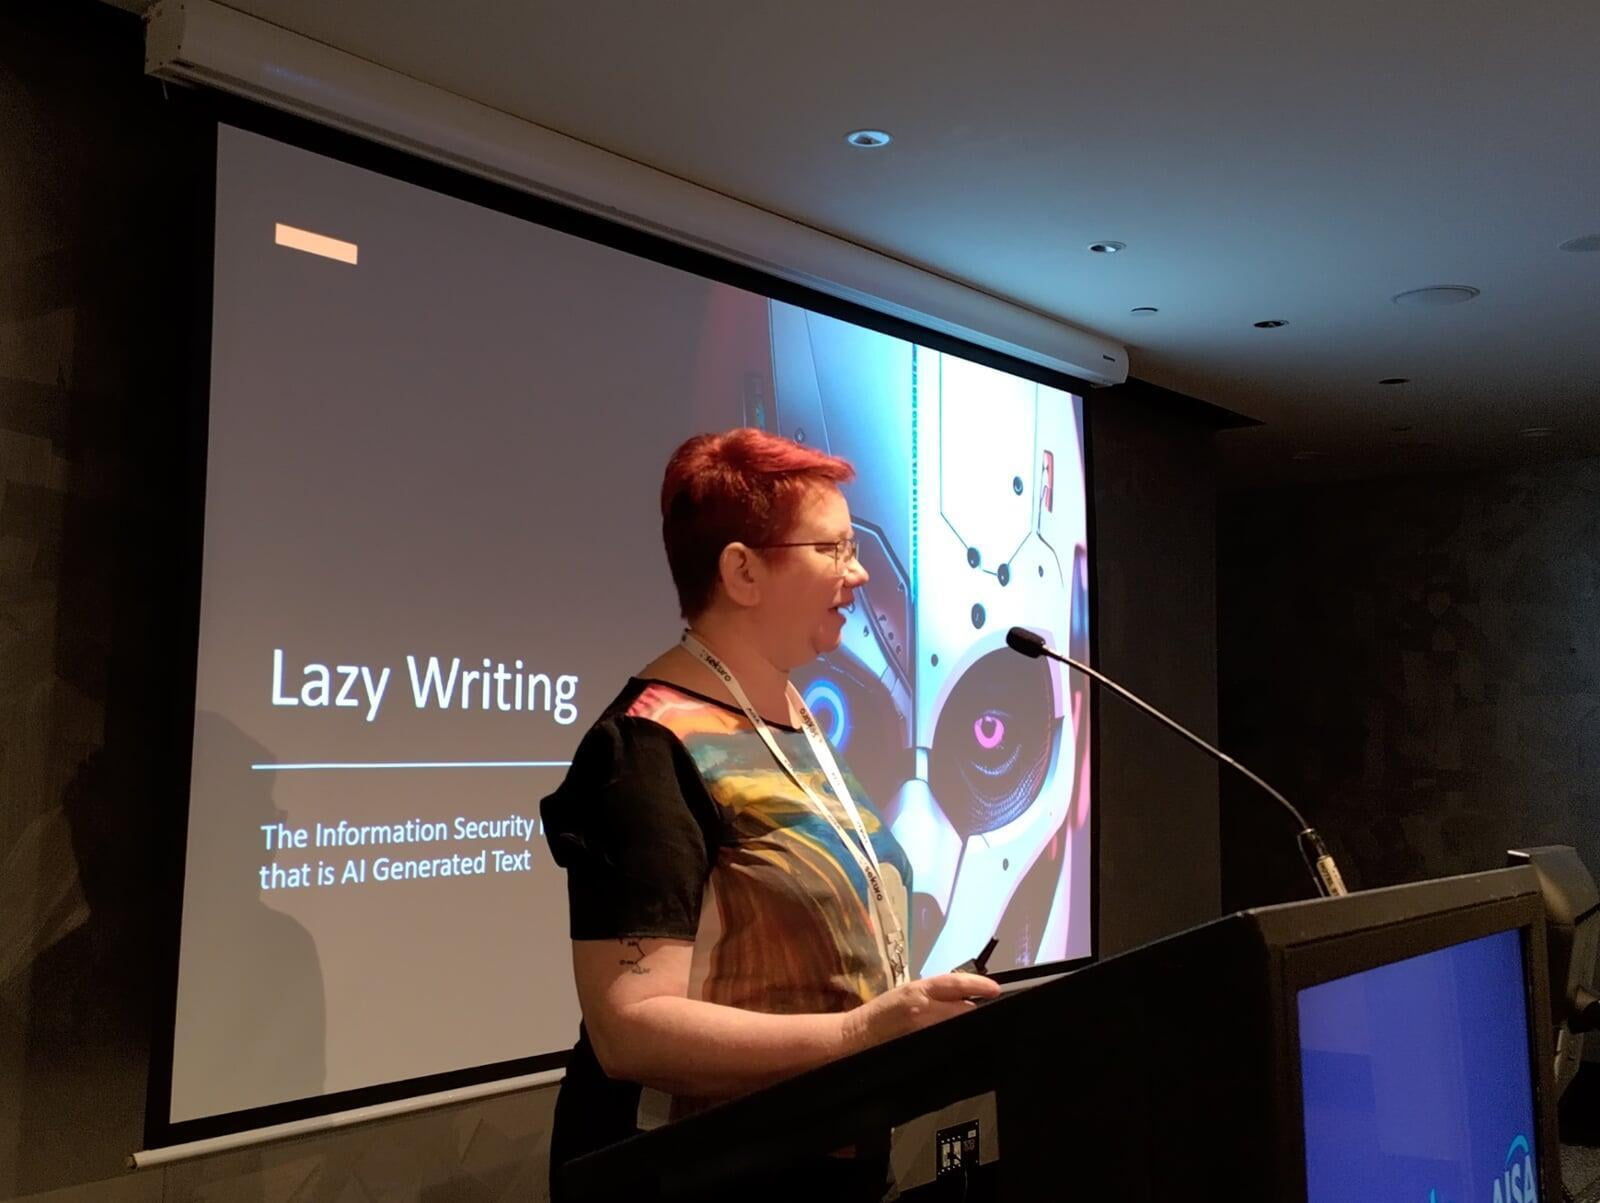 Kristine stands in front of a podium, presenting the talk "Lazy Writing".